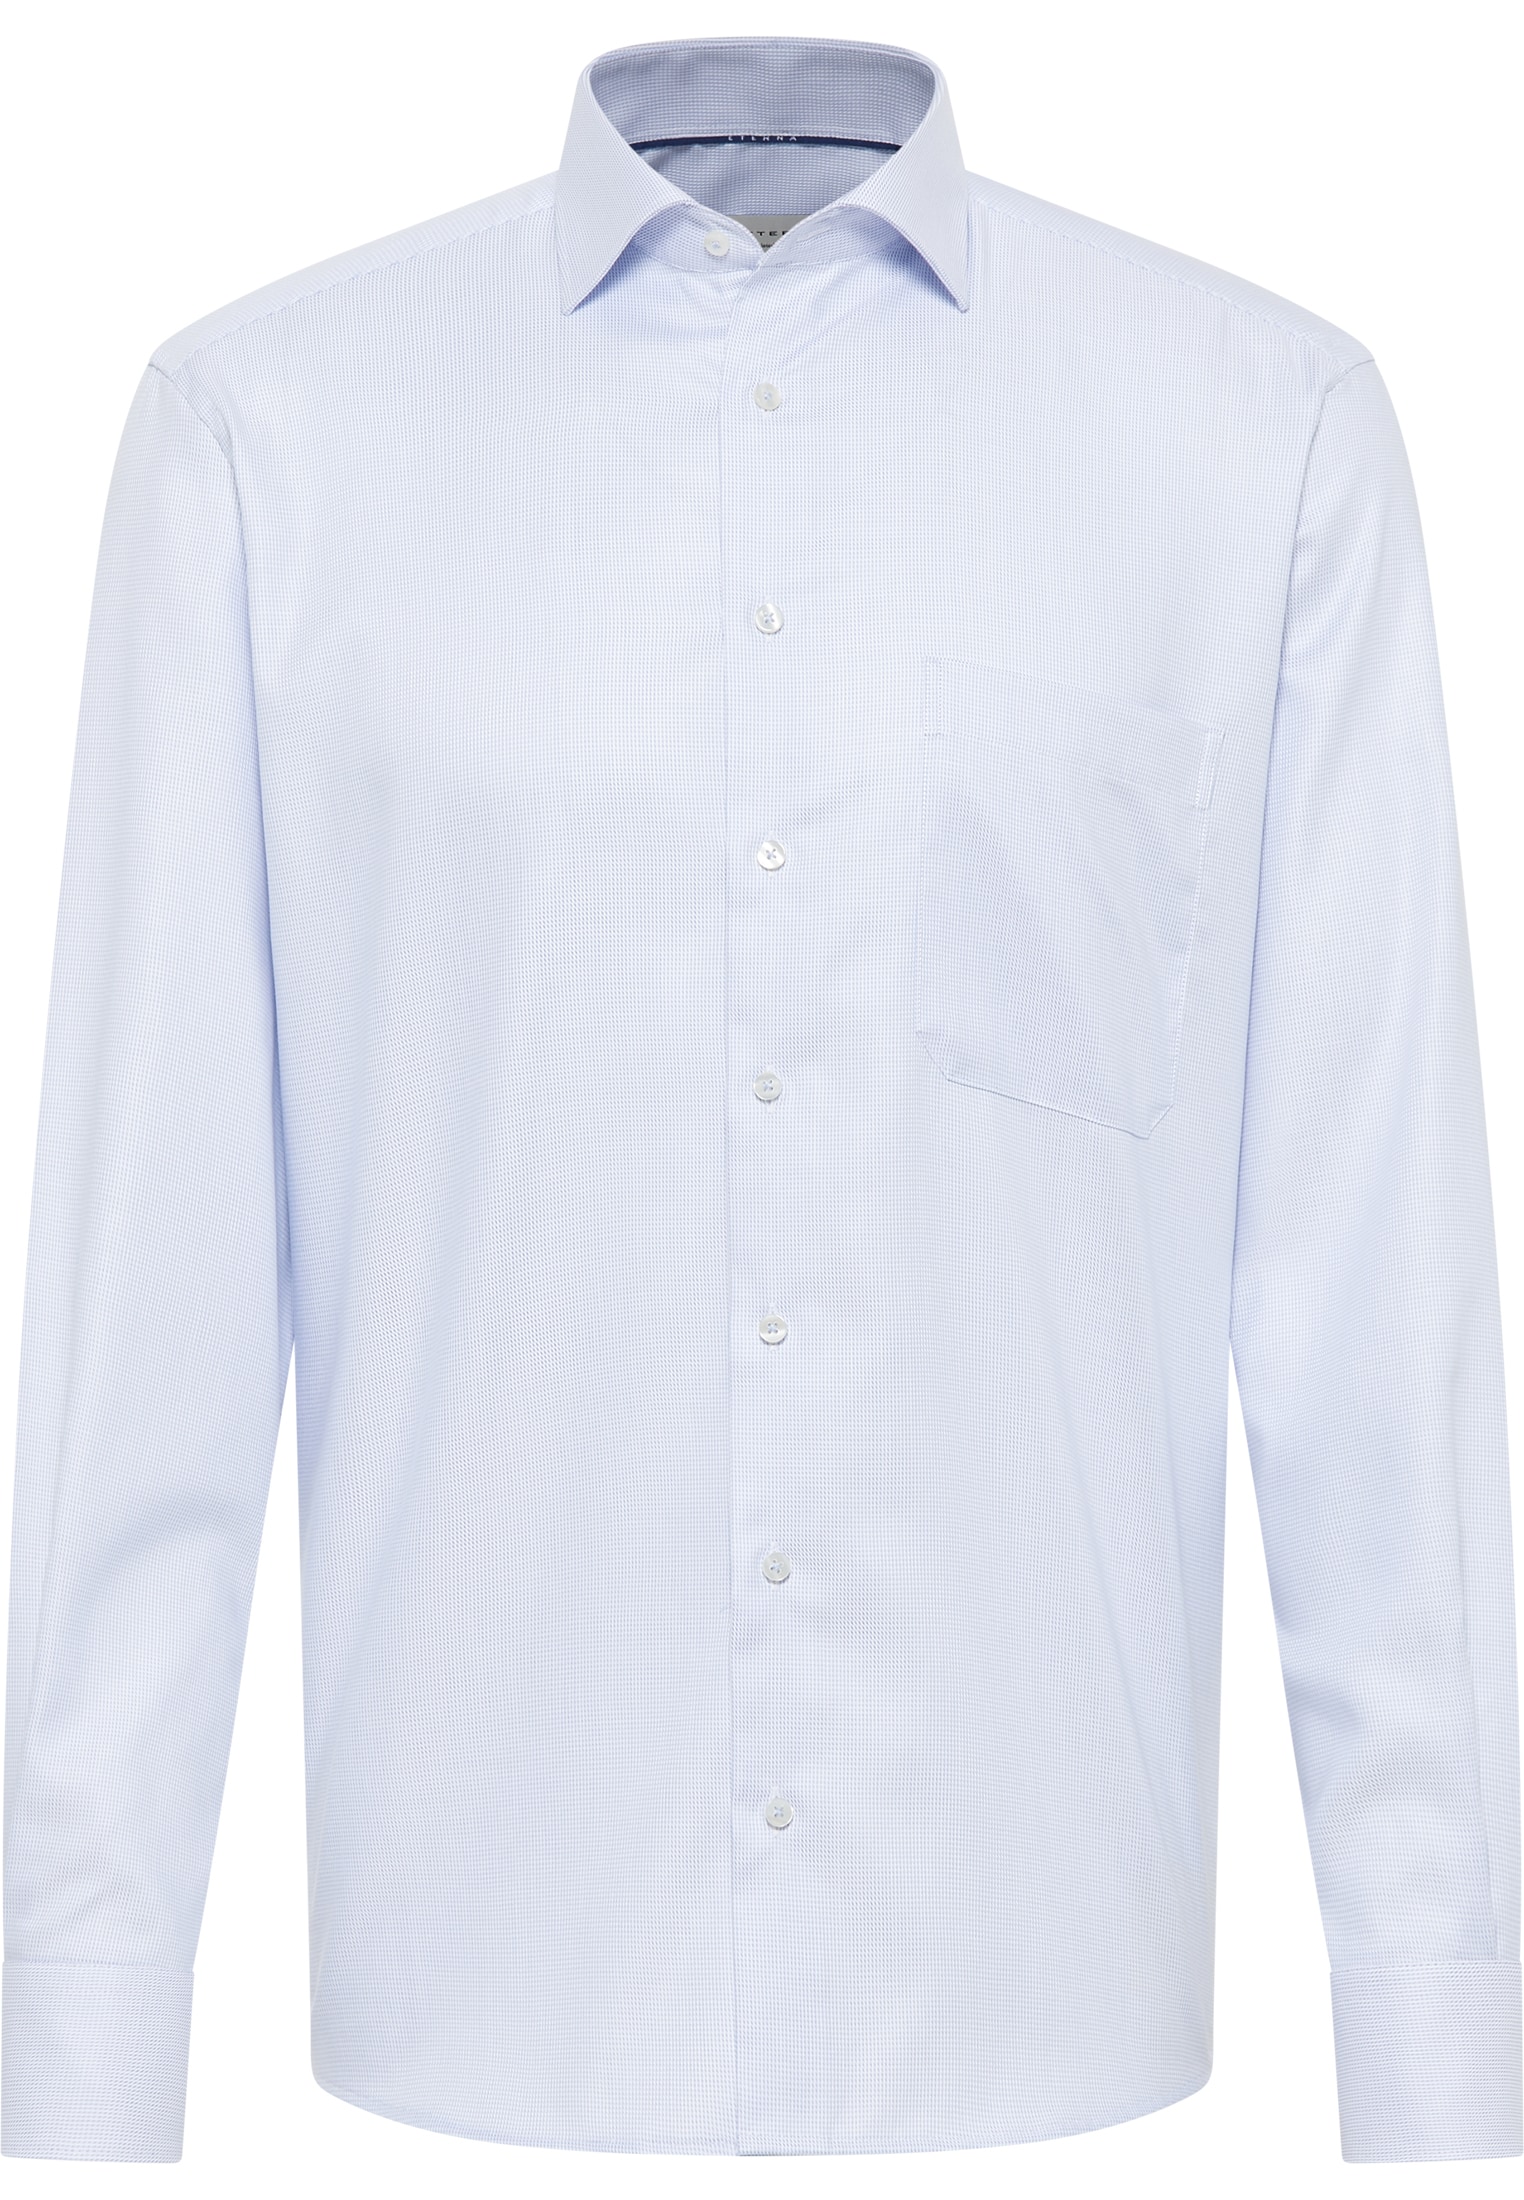 COMFORT FIT Shirt in light blue structured